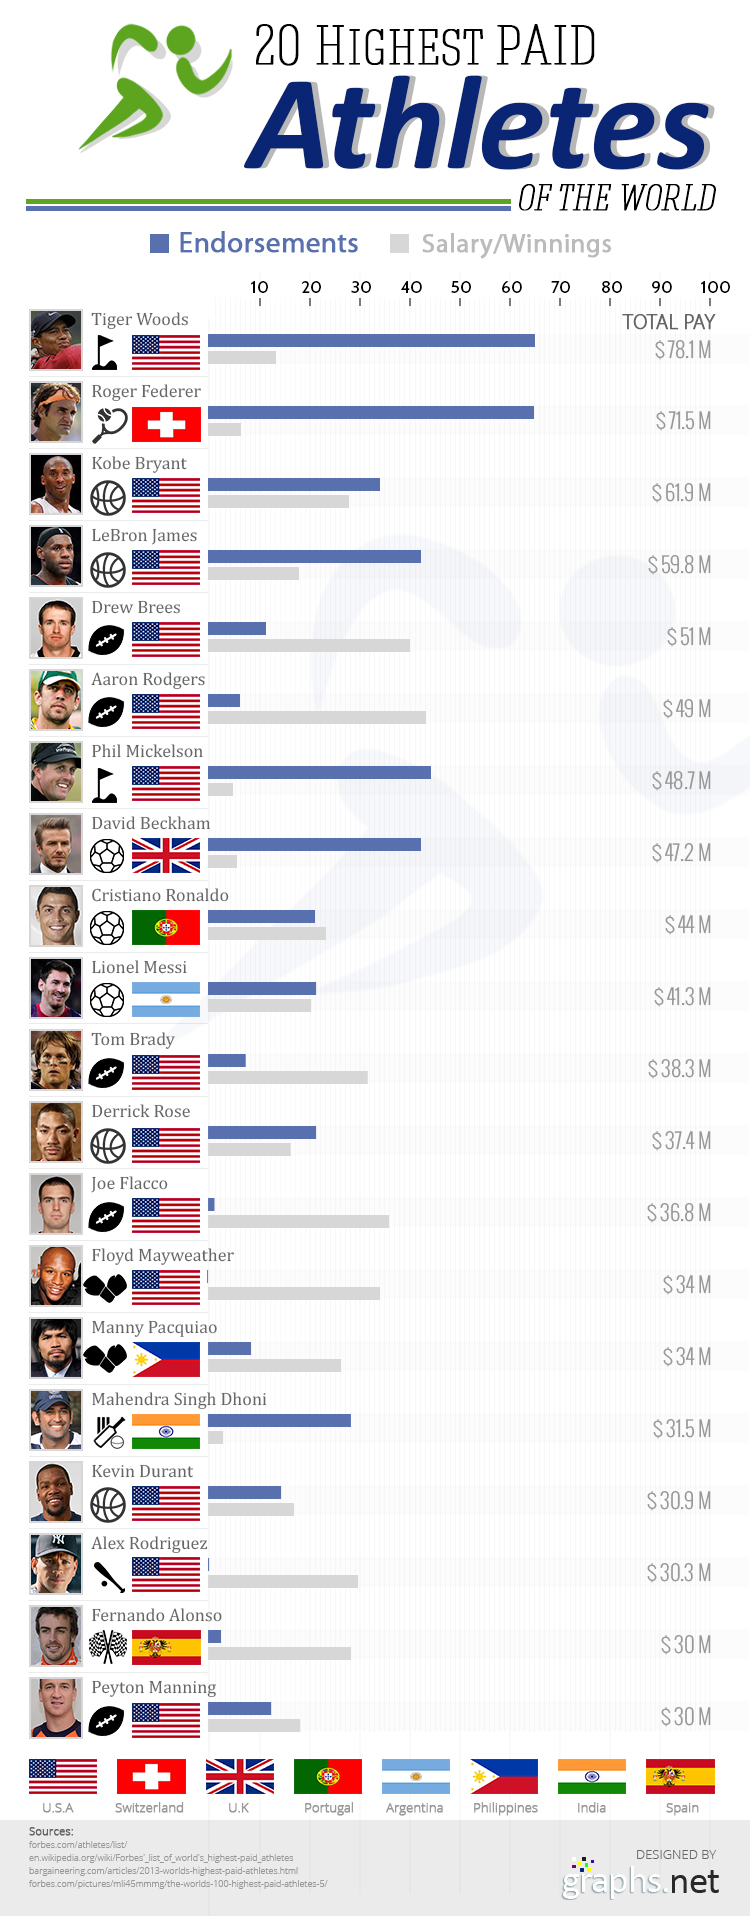 worlds highest paid athlests 2